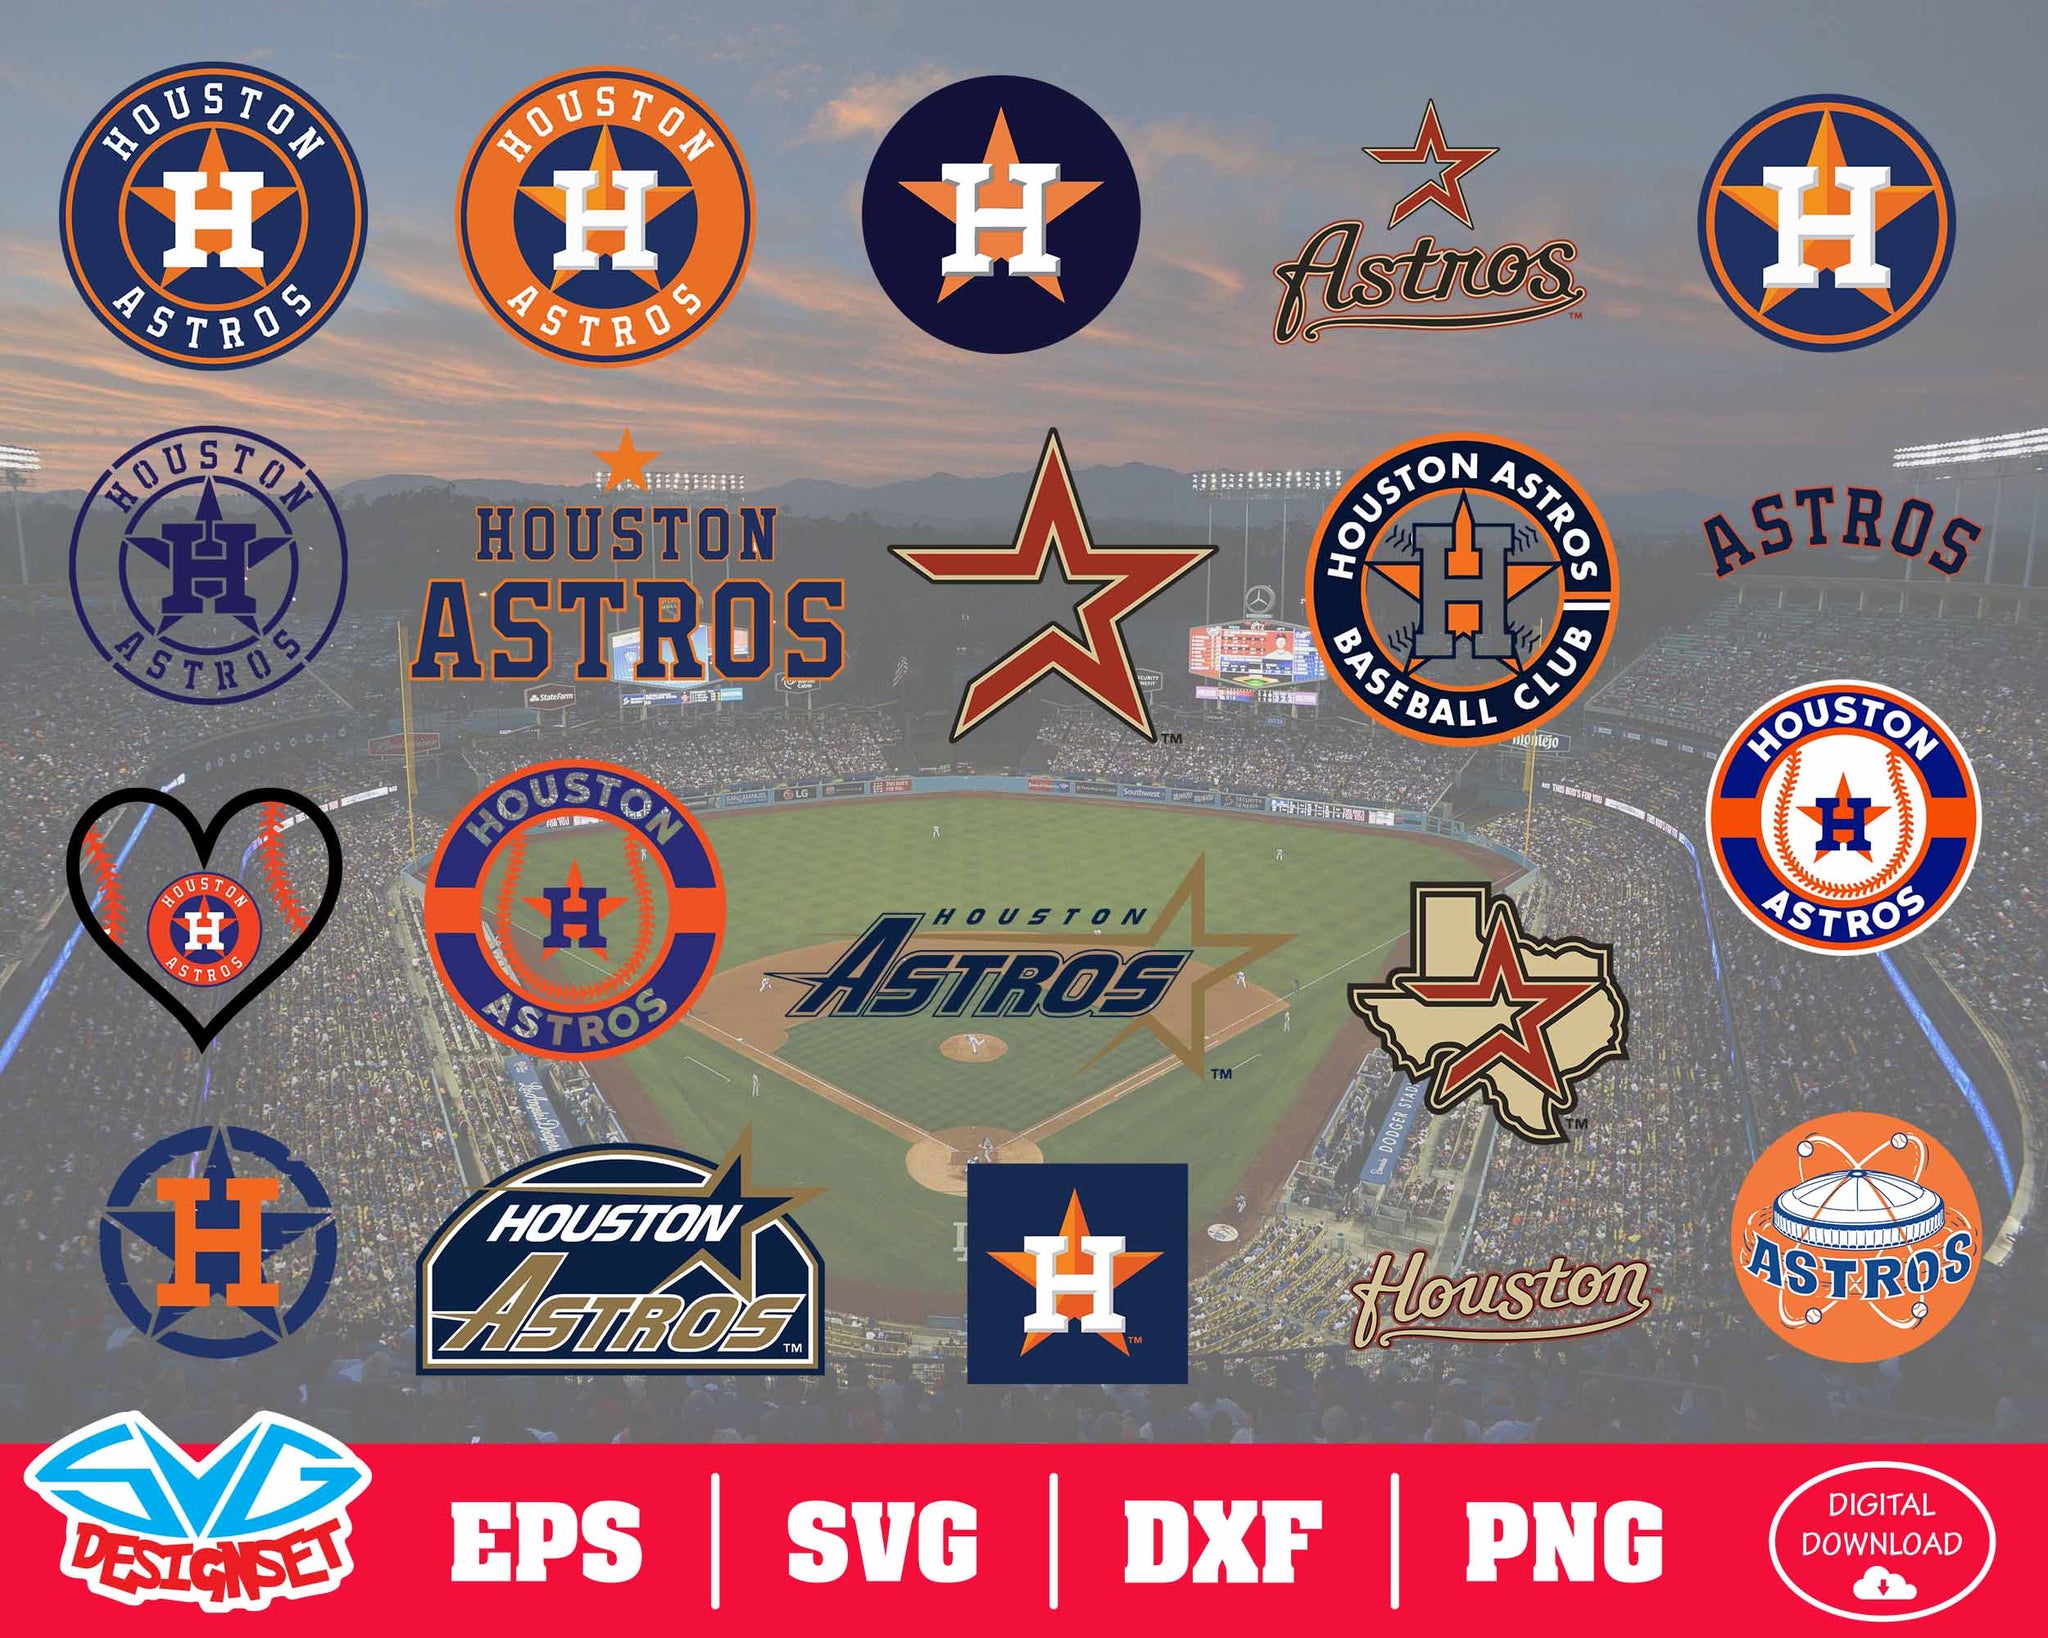 Houston Astros Team Svg, Dxf, Eps, Png, Clipart, Silhouette and Cutfil